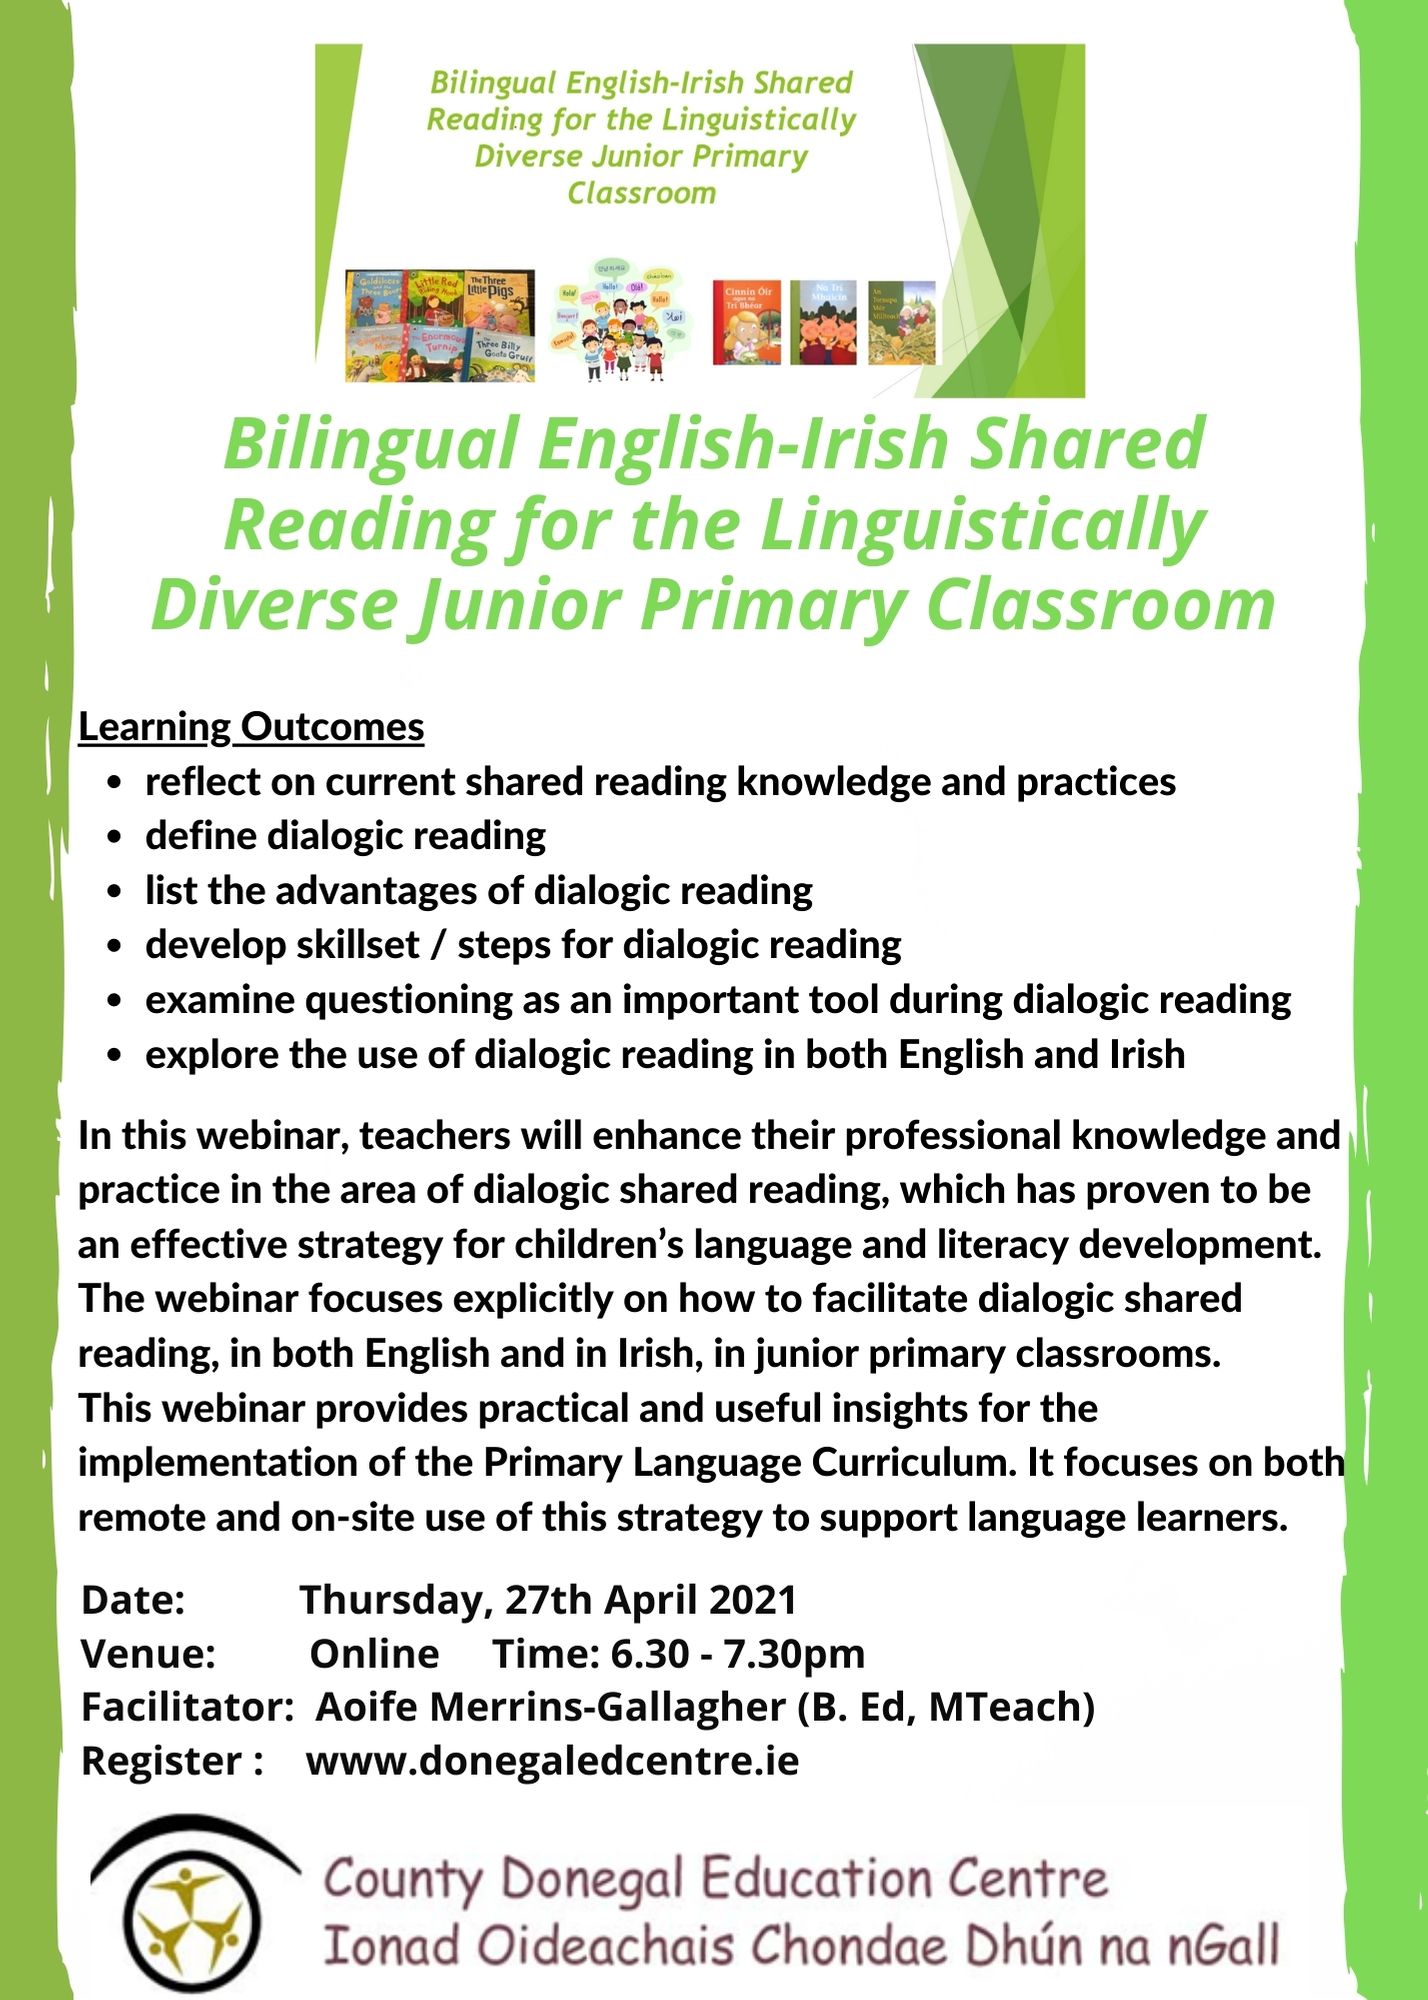 Bilingual_English-Irish_Shared_Reading_for_the_Linguistically_Diverse_Junior_Primary_Classroom.jpg